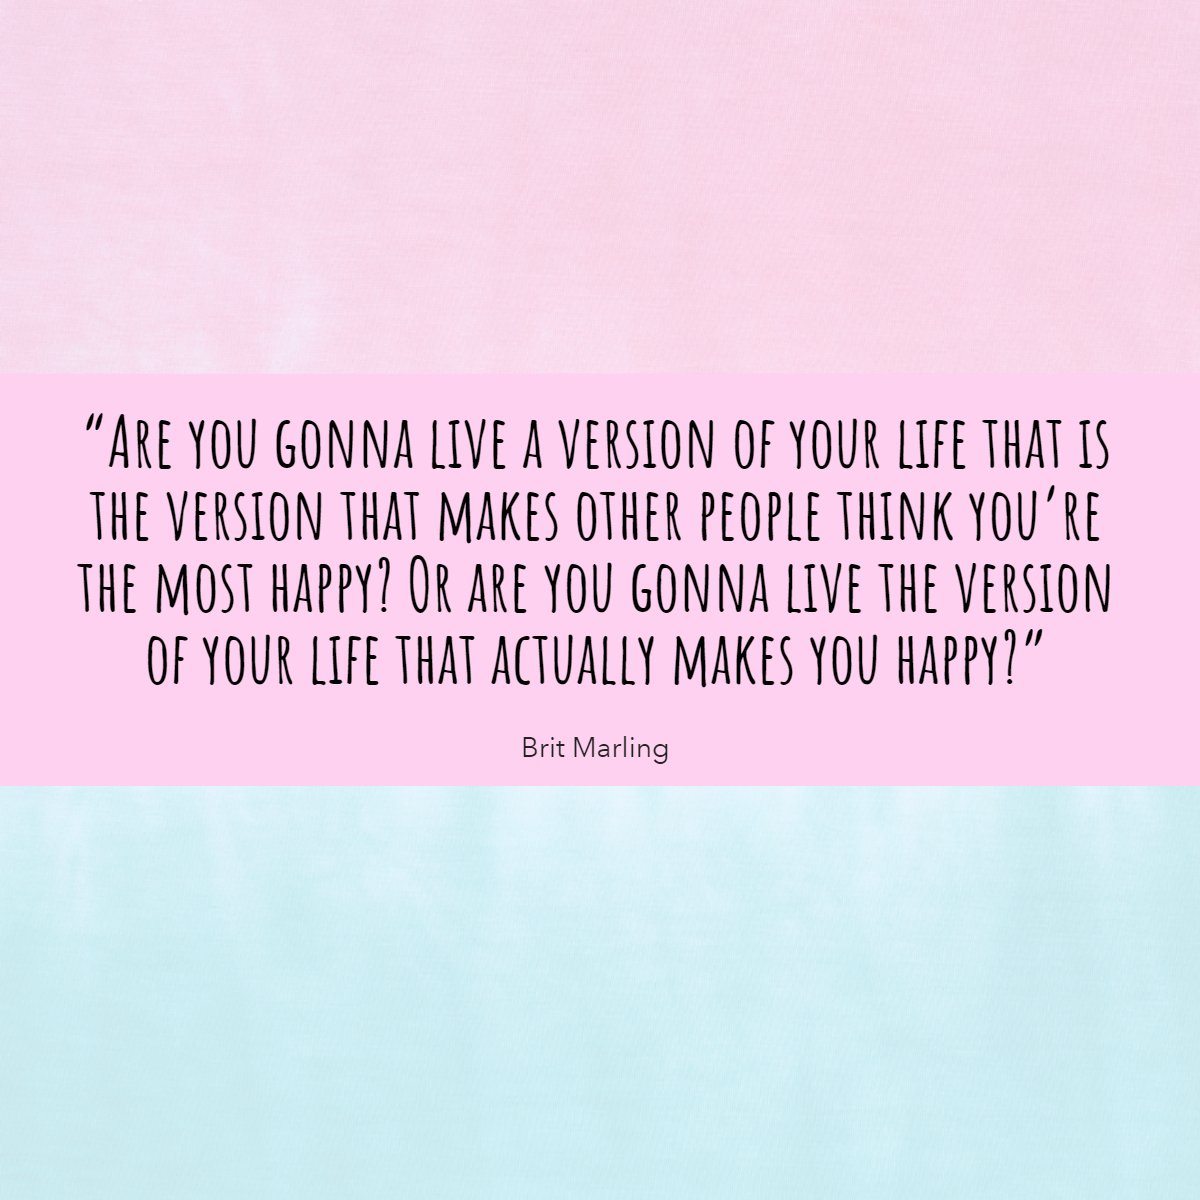 “Are you gonna live a version of your life that is the version that makes other people think you’re the most happy? Or are you gonna live the version of your life that actually makes you happy?”

- Brit Marling

#yourbestlife   #yourchoice   #live